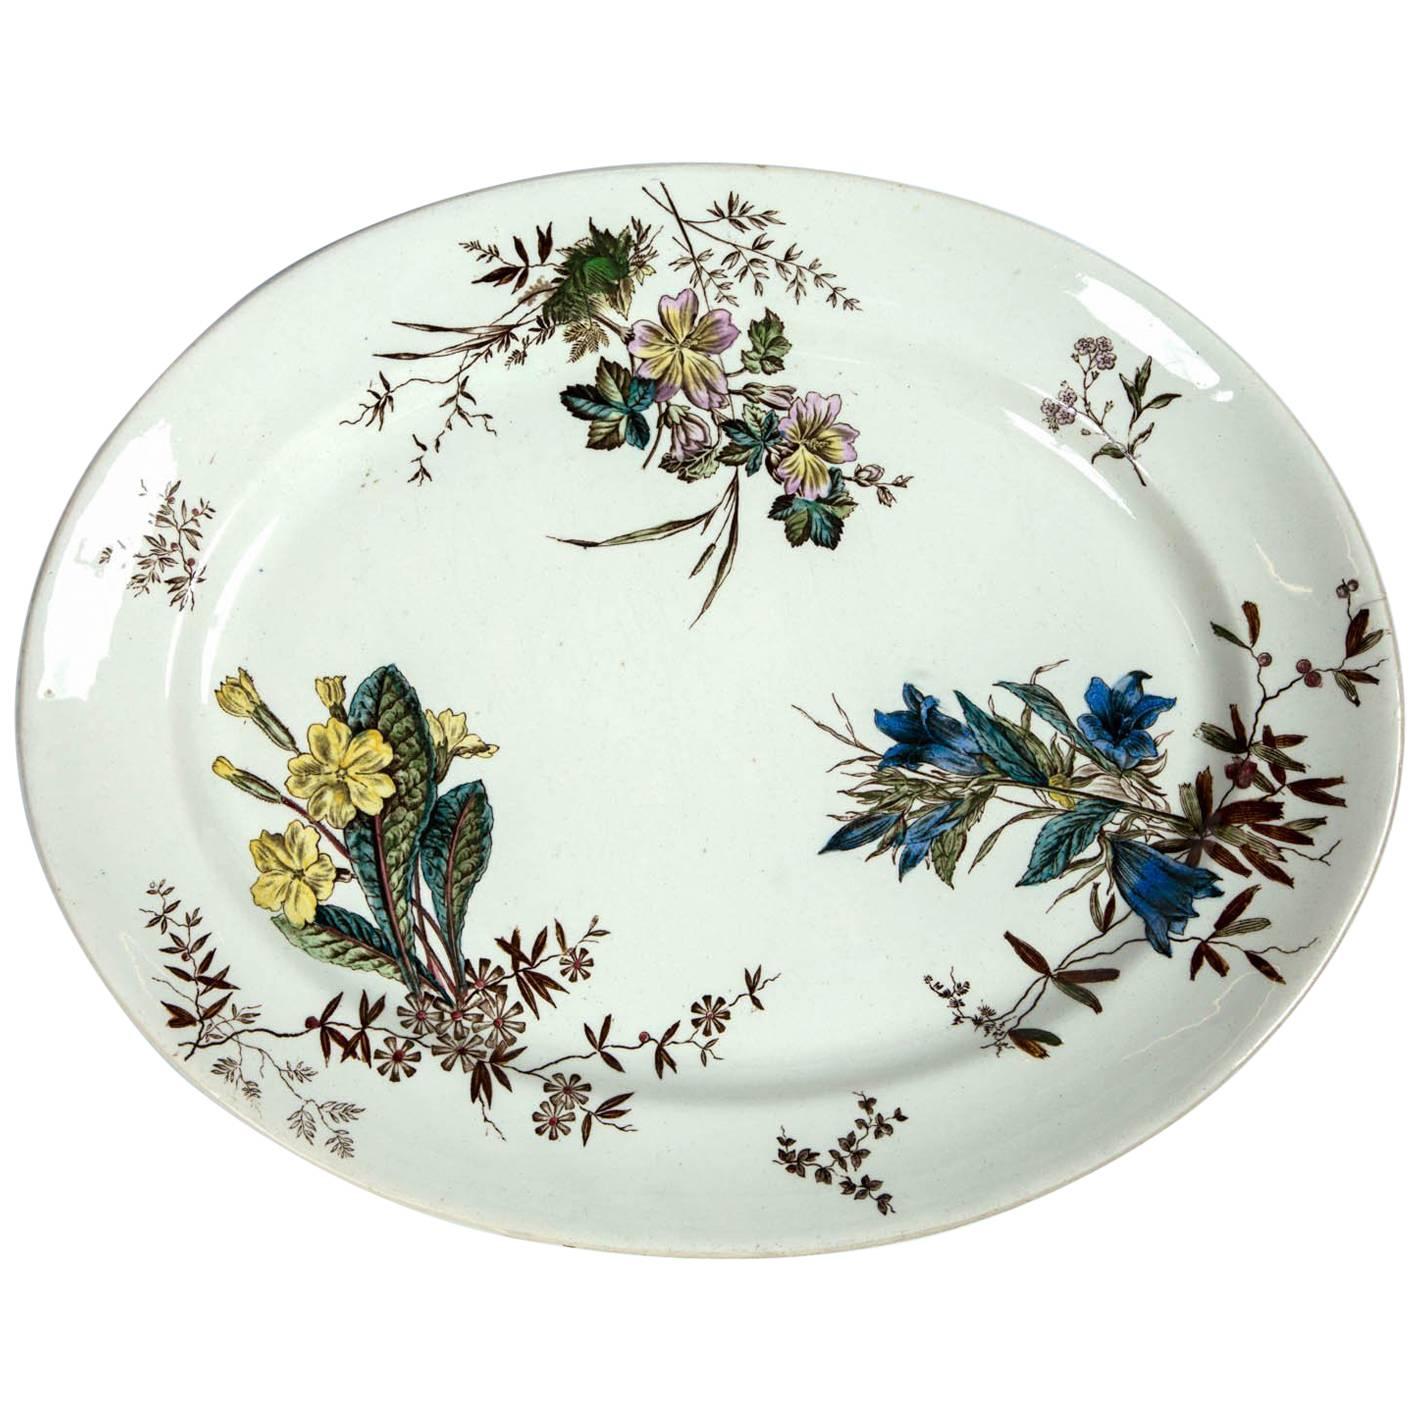 Antique Ceramic Serving Platter, Early 19th Century